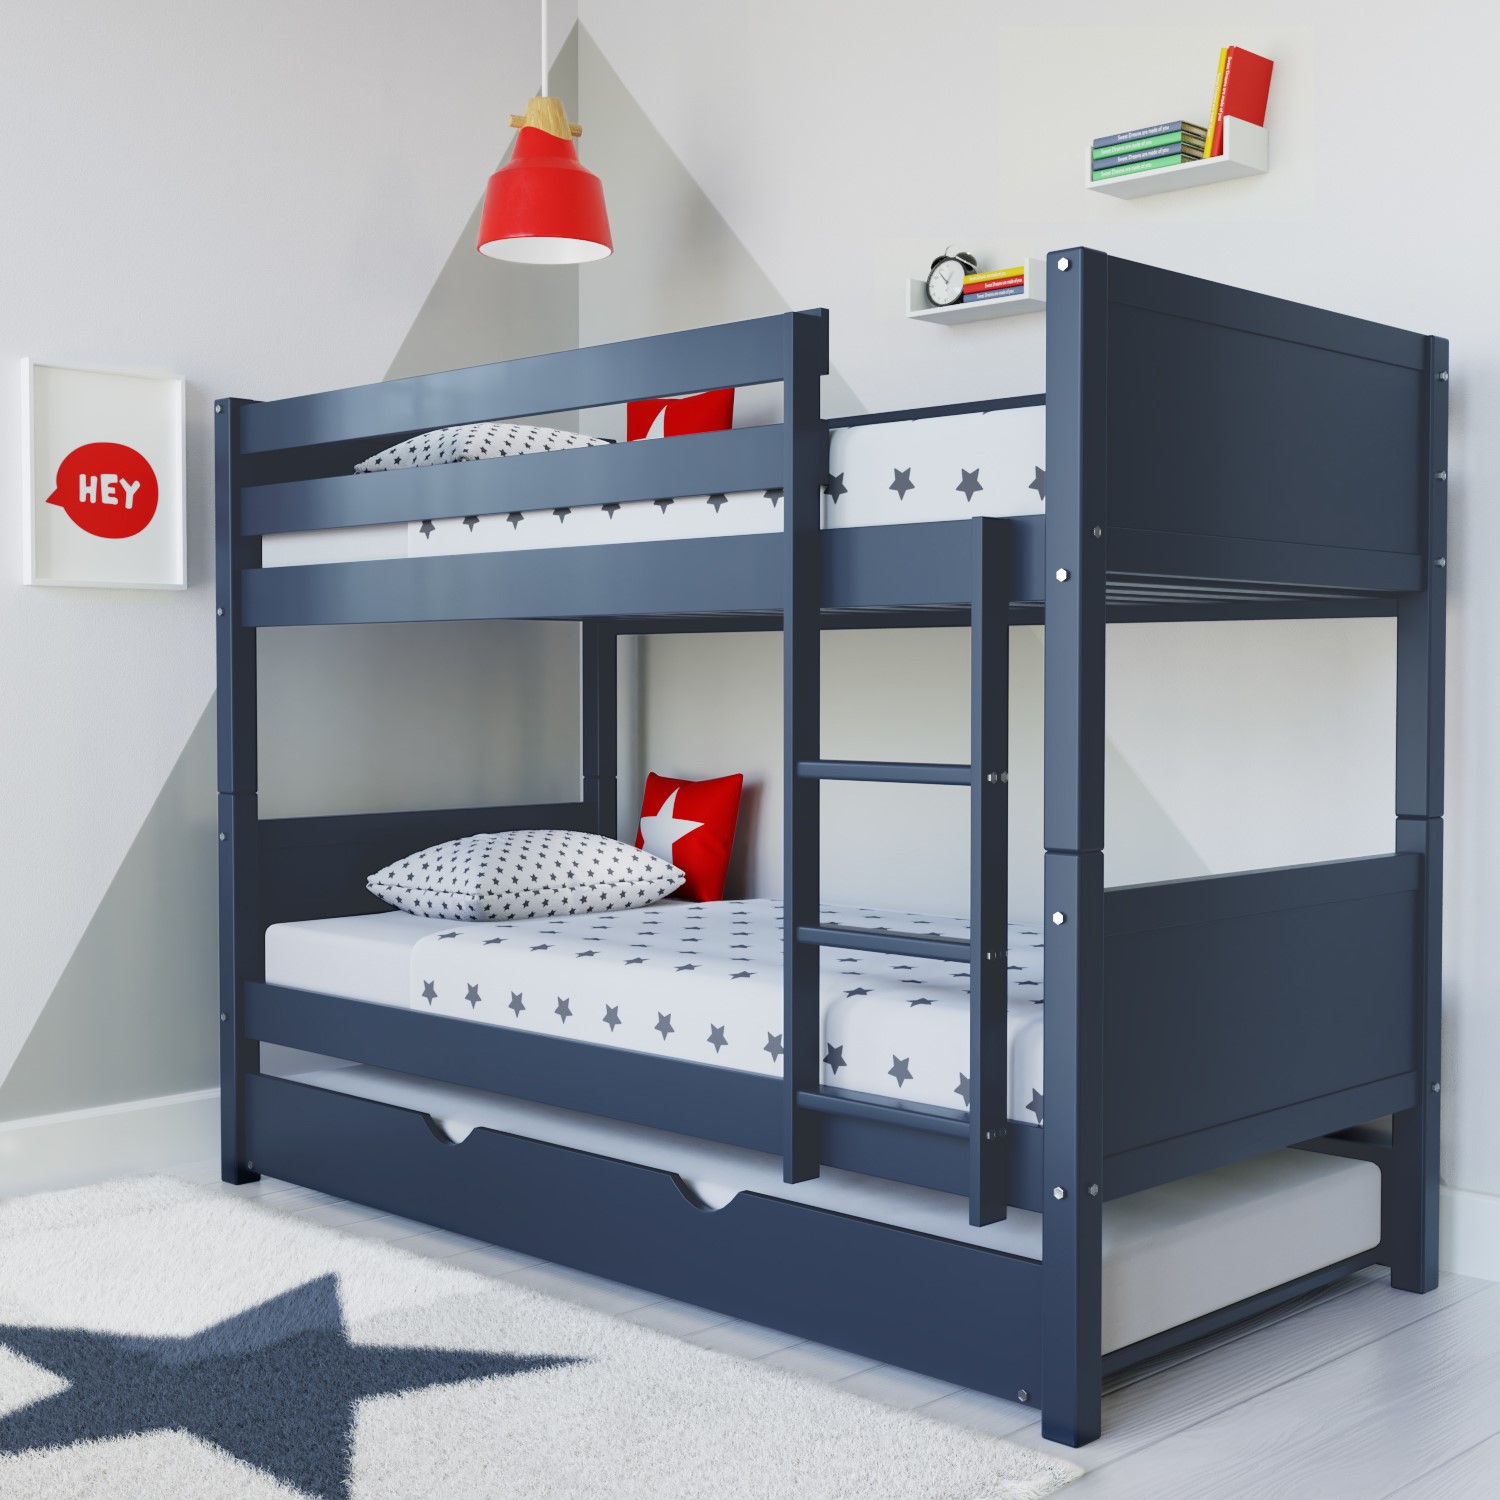 Read more about Navy blue detachable wooden bunk bed with trundle luca